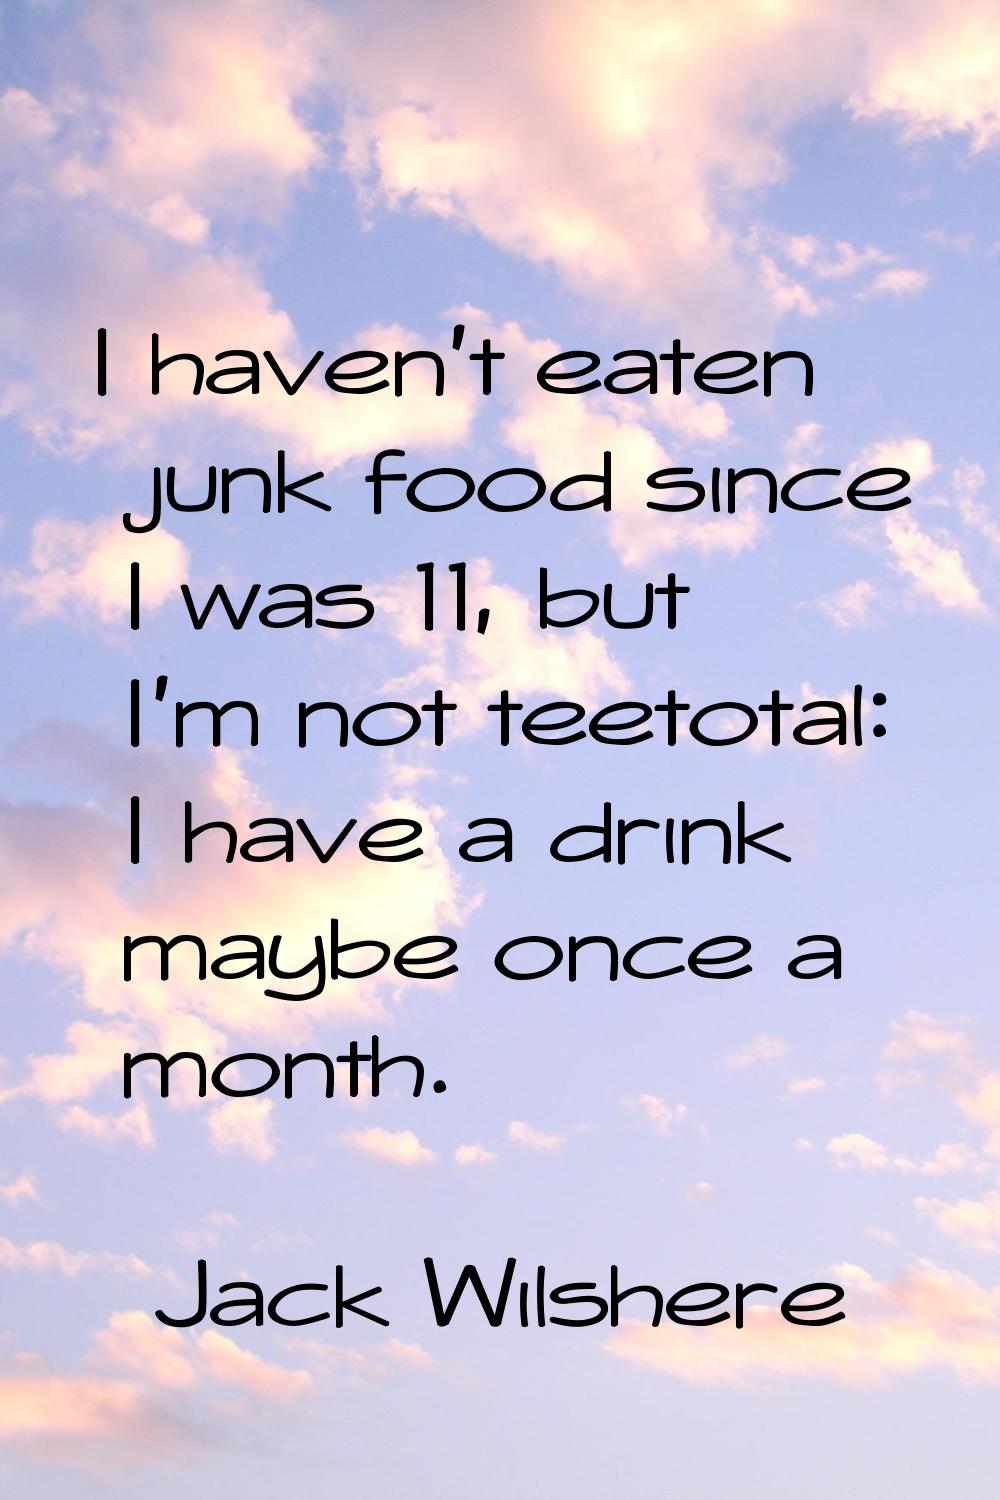 I haven't eaten junk food since I was 11, but I'm not teetotal: I have a drink maybe once a month.